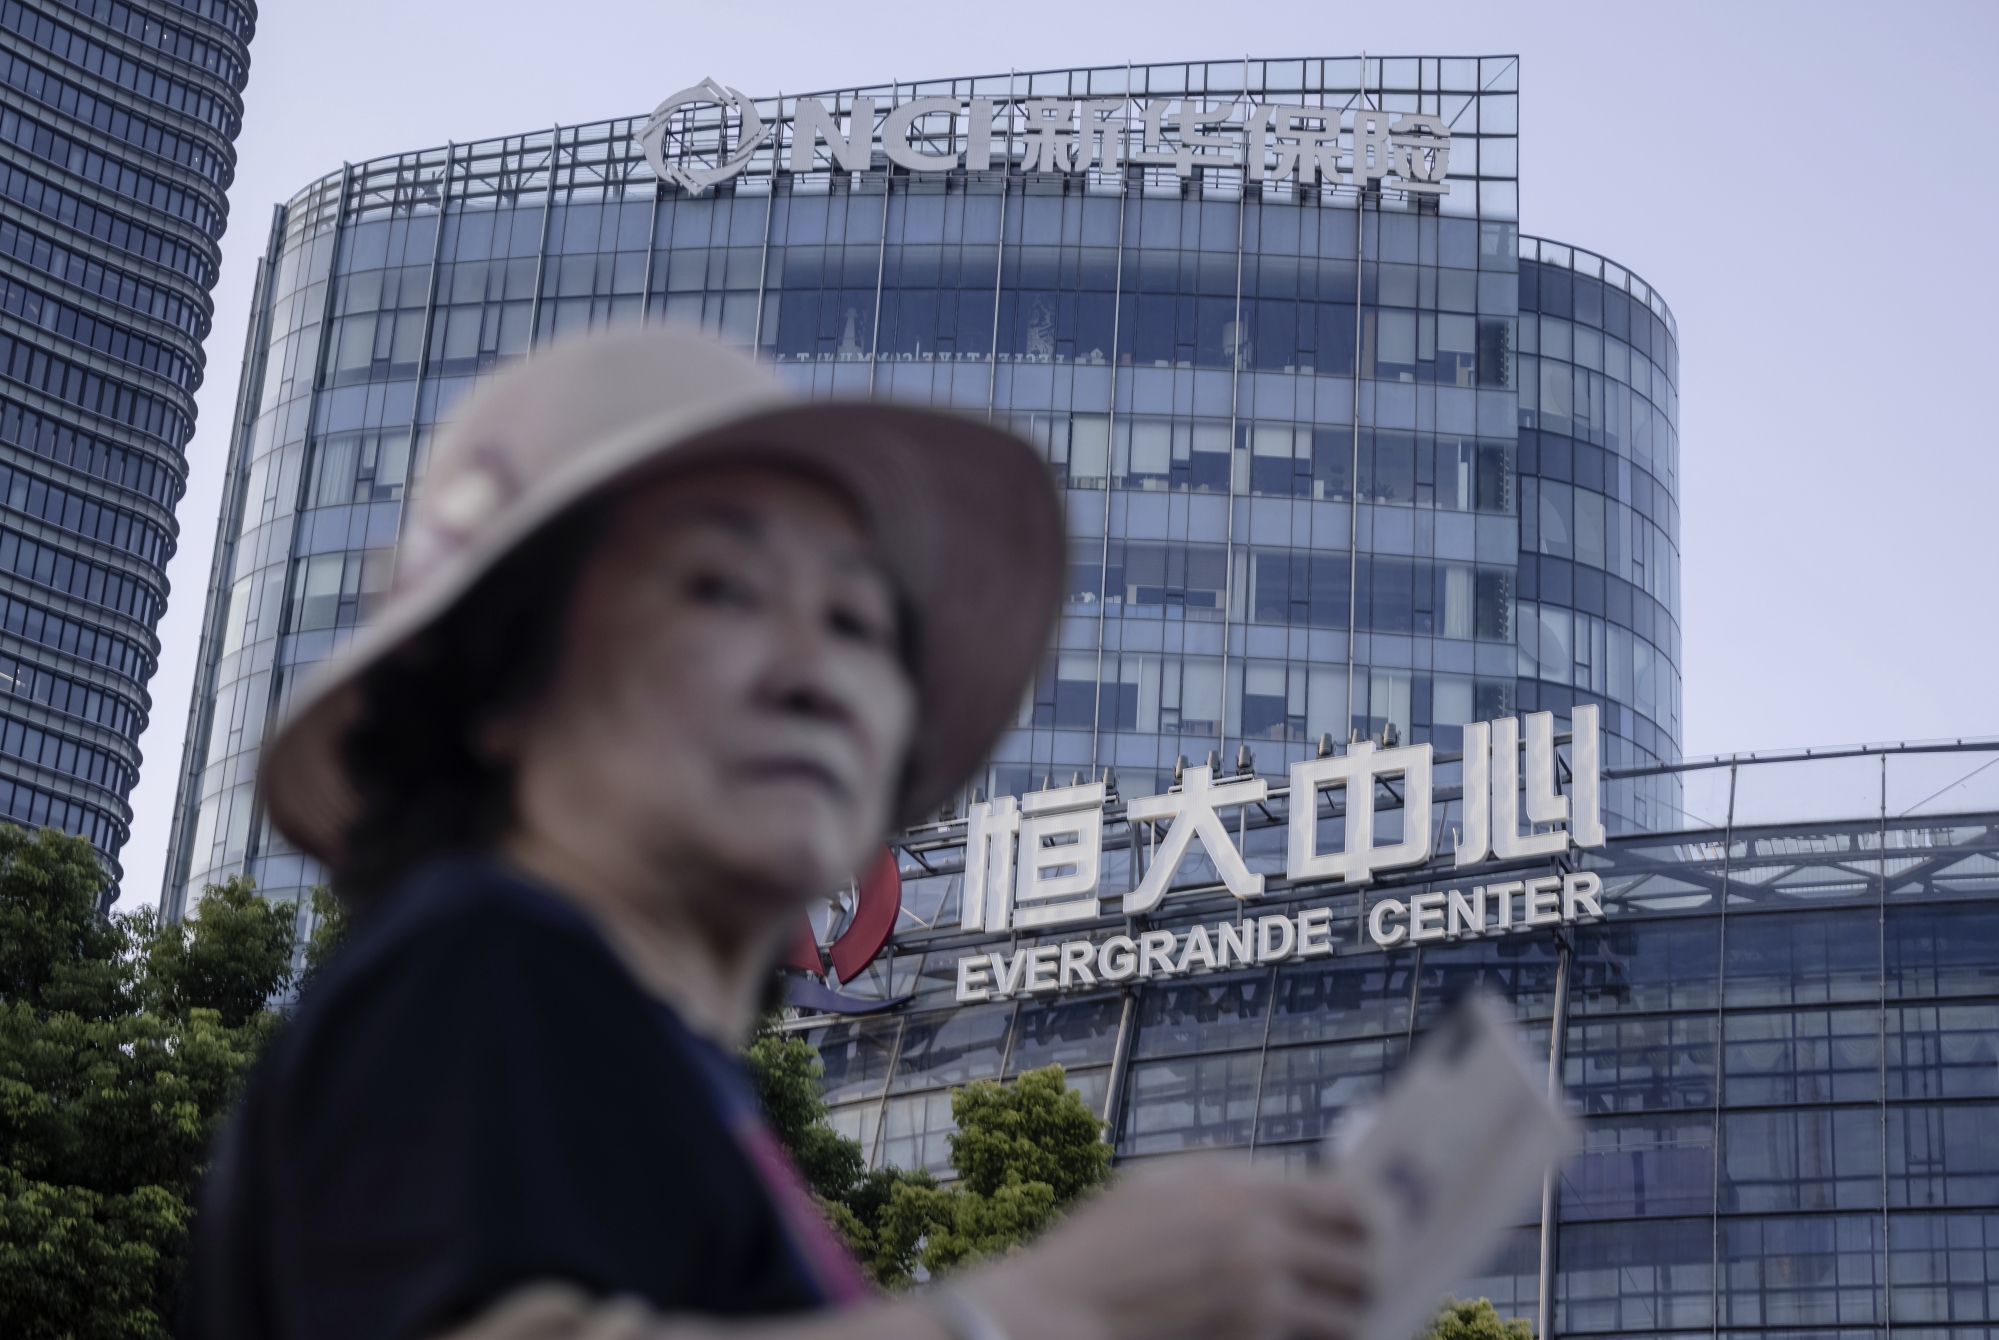 epa09479218 A woman walks past the Evergrande Center in Shanghai, China, 21 September 2021. Evergrande Group is China?s real estate conglomerate and the world?s most indebted property developer. Stock markets in Asia, the USA, and Europe were hit by a major sell-off on 20 September since the company?s shares closed 10 percent lower in Hong Kong. The Evergrande Group announced its concern in a stock filing this month that the group might not be able to meet its financial obligations.  EPA/ALEX PLAVEVSKI